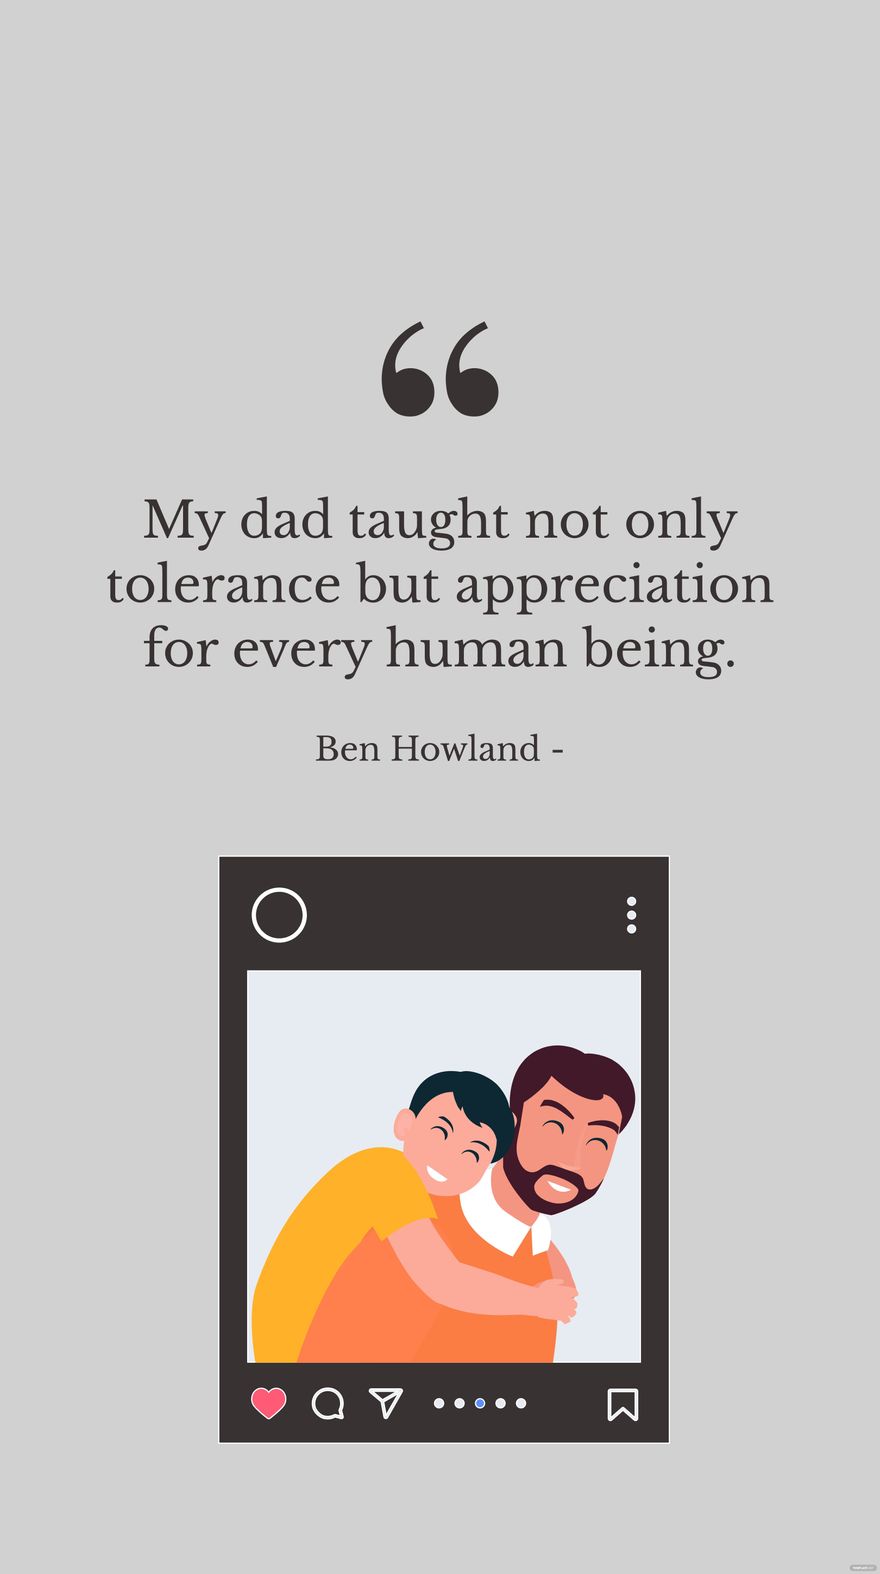 Free Ben Howland - My dad taught not only tolerance but appreciation for every human being. in JPG